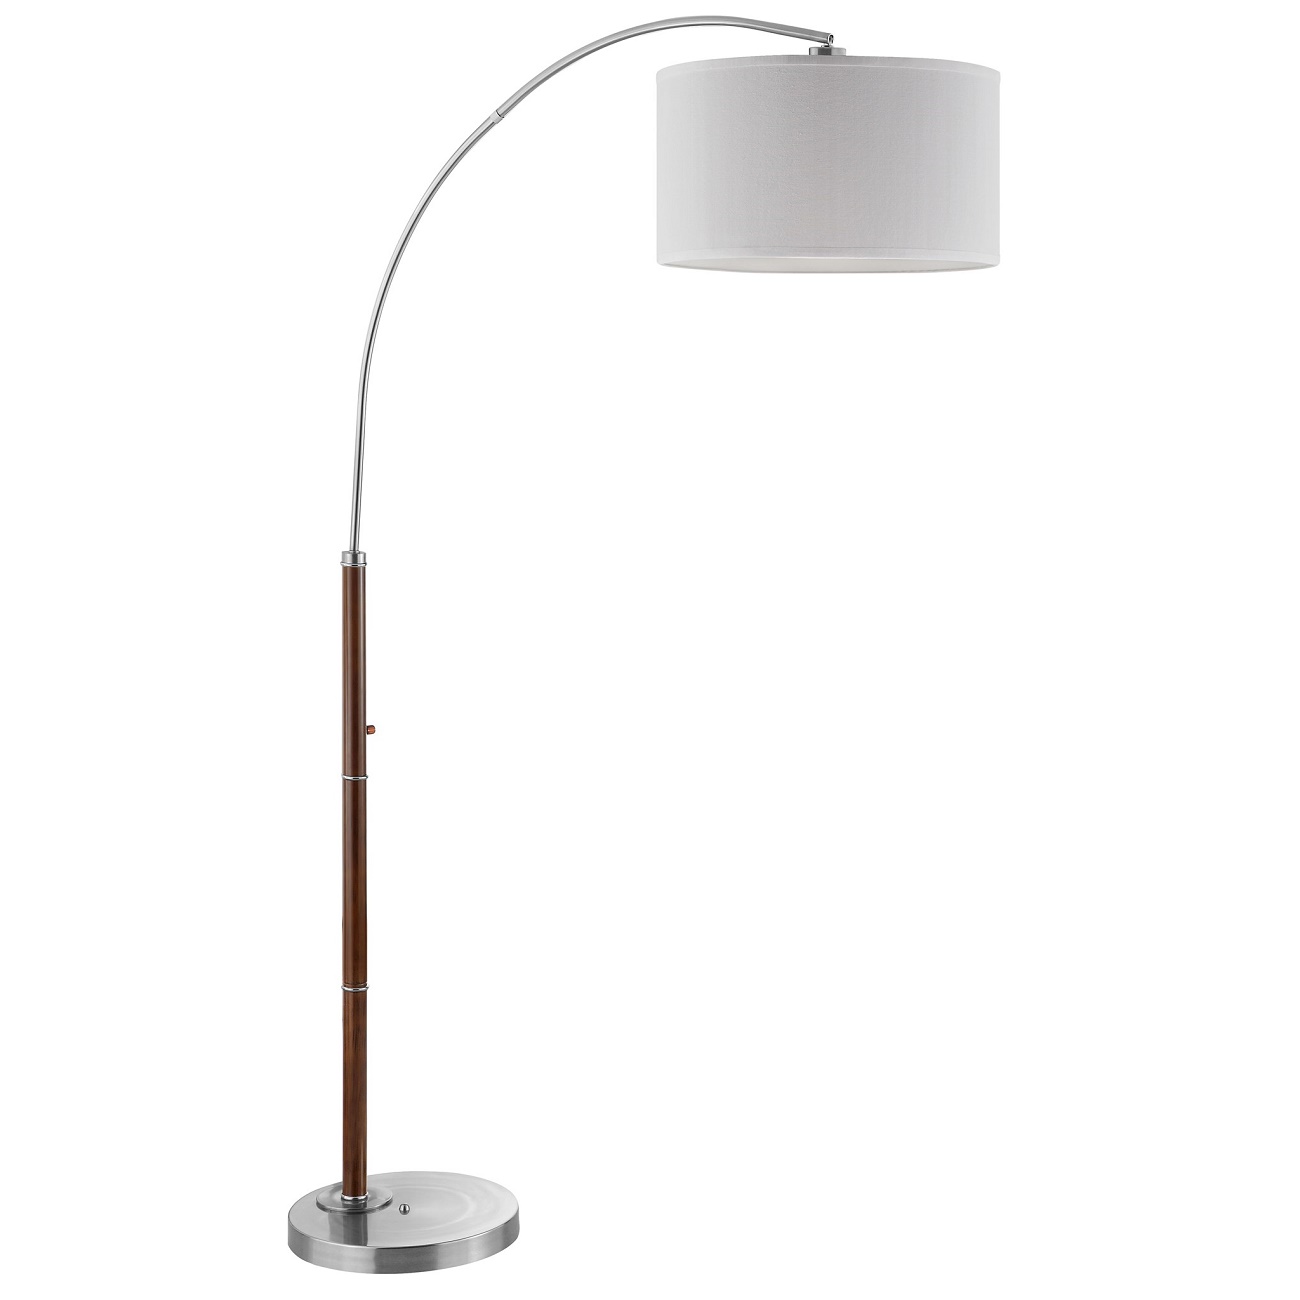 Stein World Archy Contemporary Table Lamps for Living Room Brooklyn, New York- Accentuations Brand